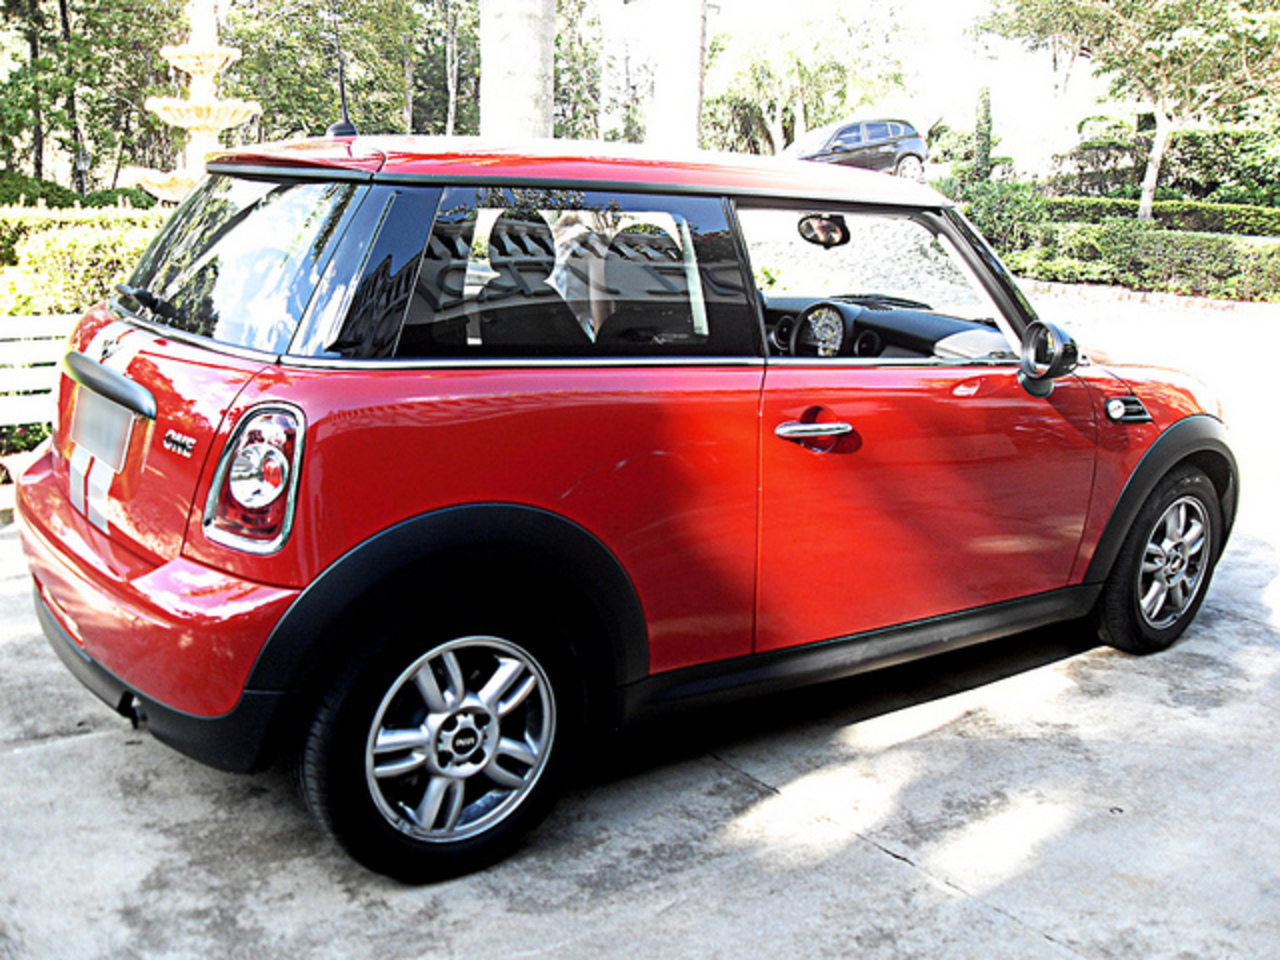 MINI Cooper One | Flickr - Photo Sharing!